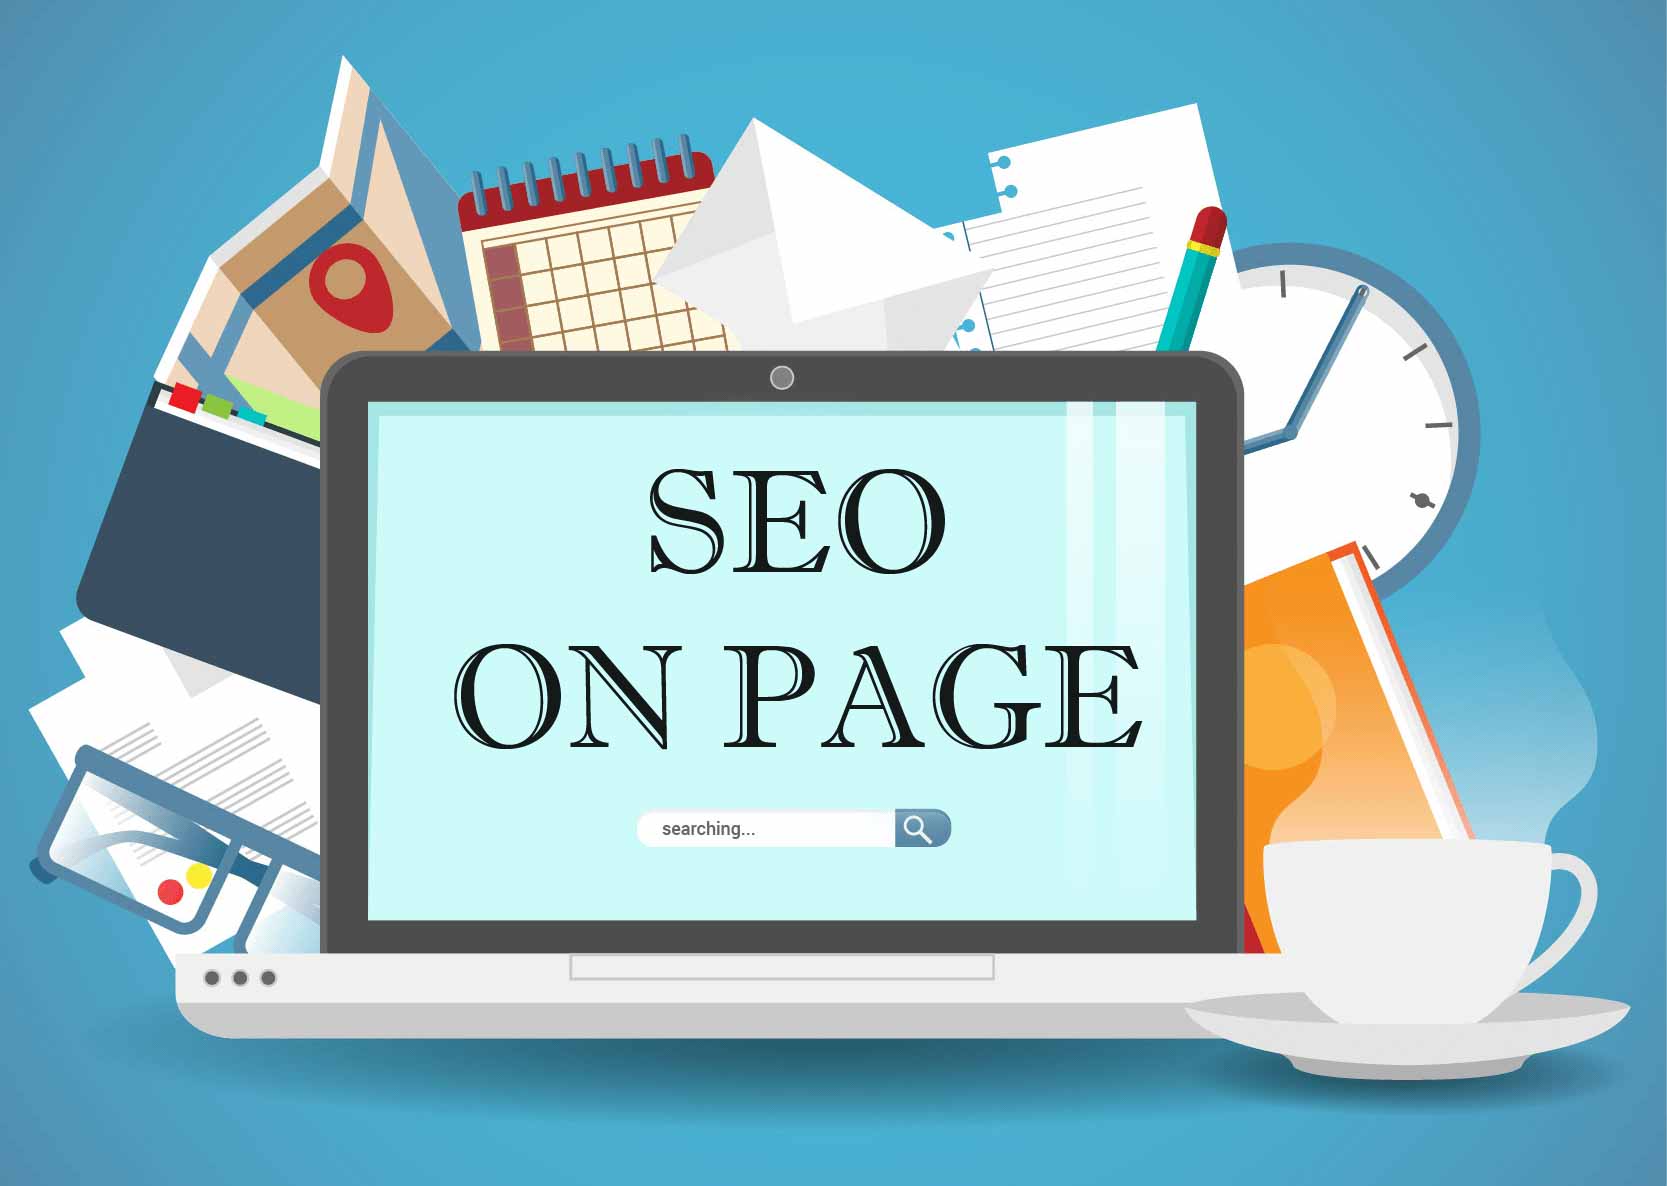 SEO offpage